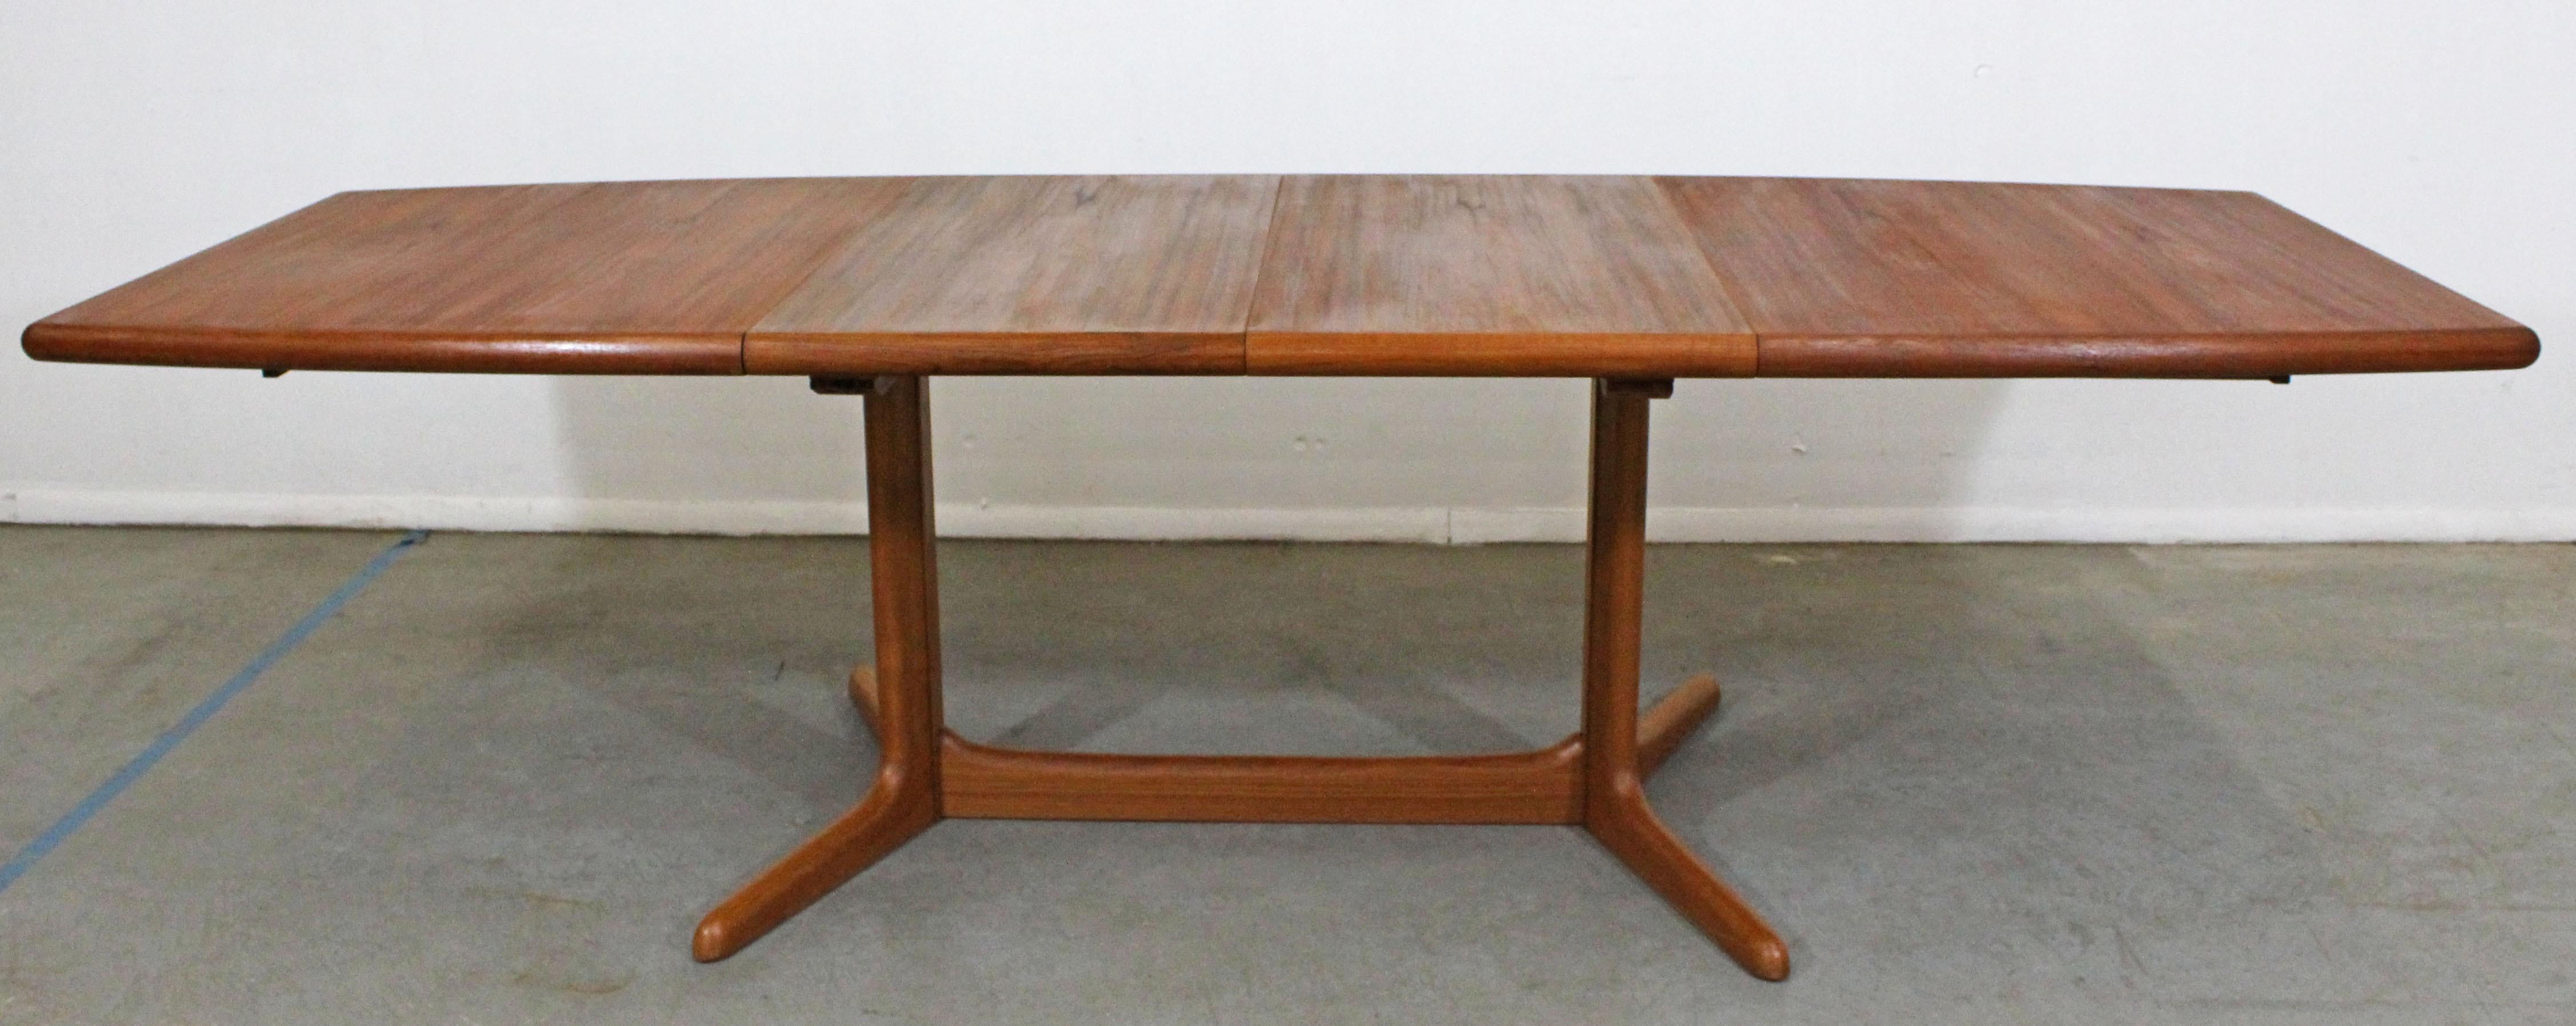 Offered is a Danish Modern teak dining table with an extendable surfboard-top. Includes two 19.75